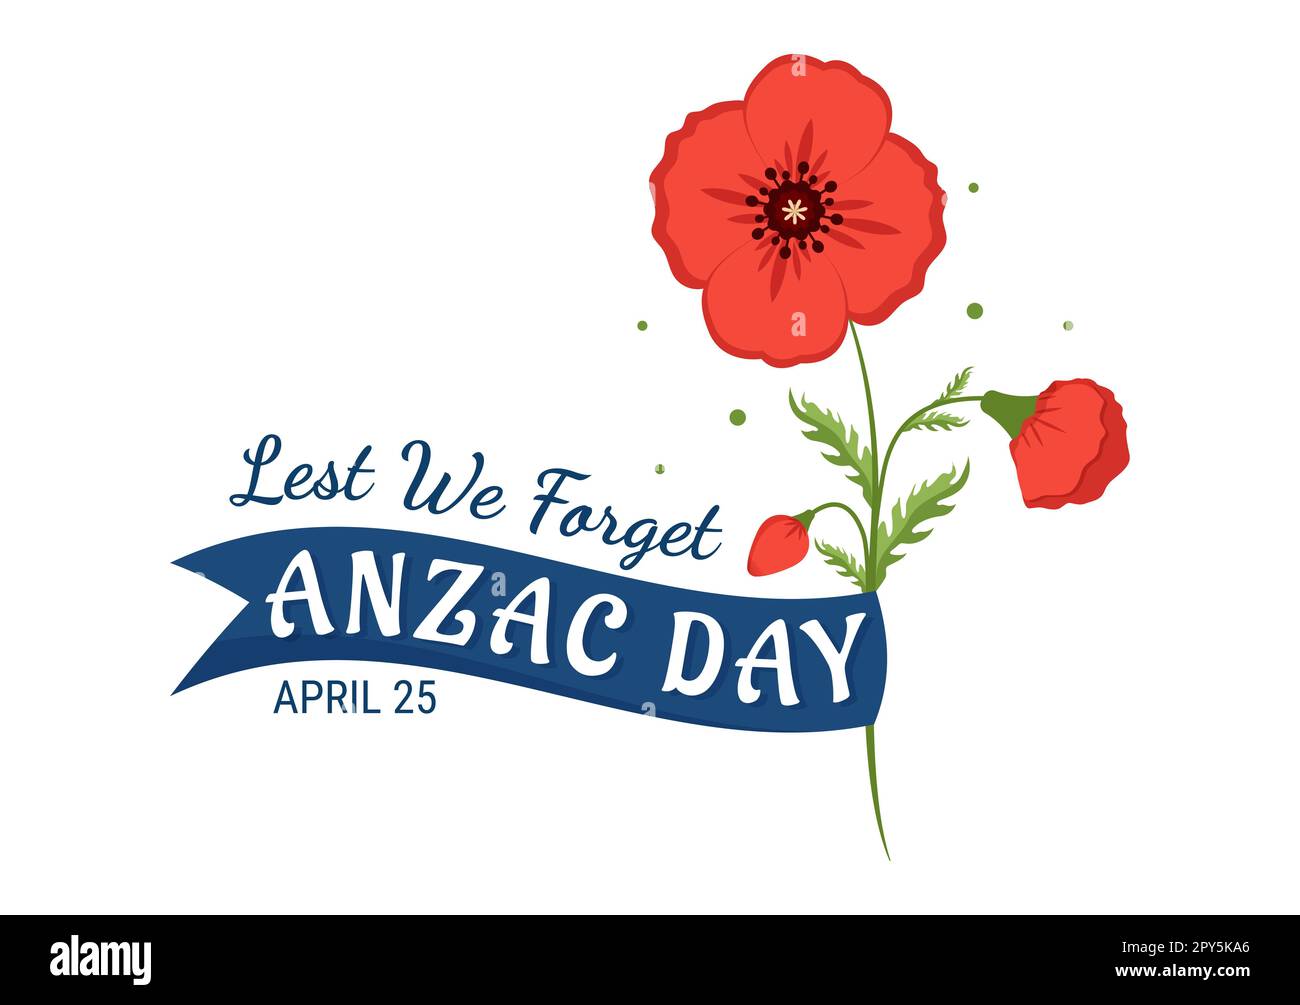 Anzac Day of Lest We Forget Illustration with Remembrance Soldier Paying Respect and Red Poppy Flower in Flat Hand Drawn for Landing Page Templates Stock Photo